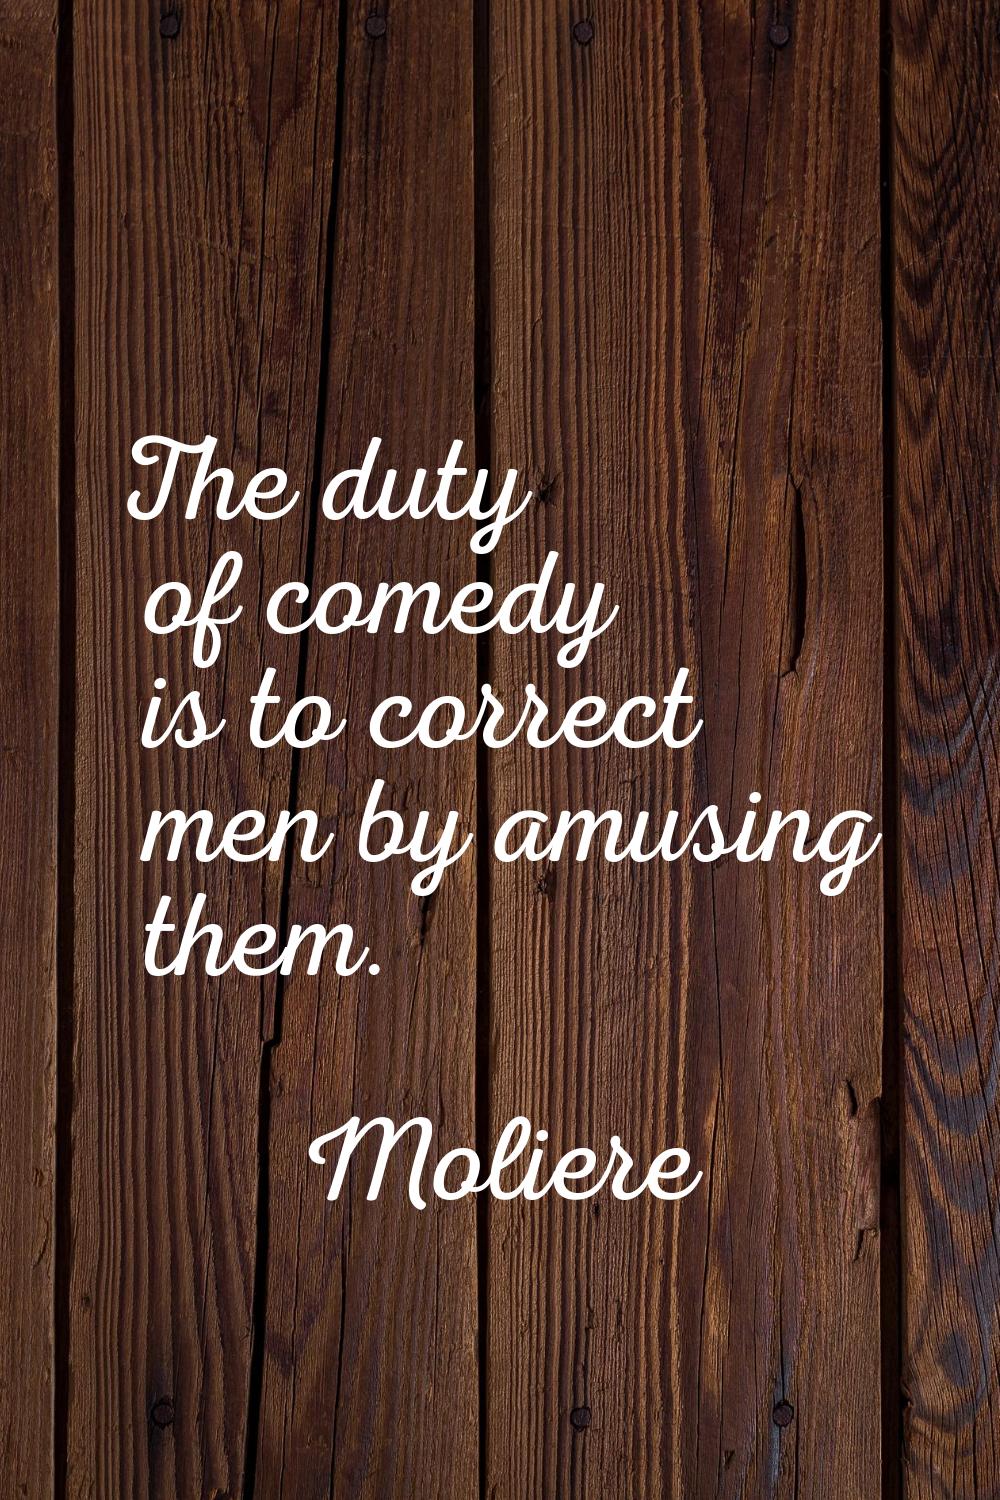 The duty of comedy is to correct men by amusing them.